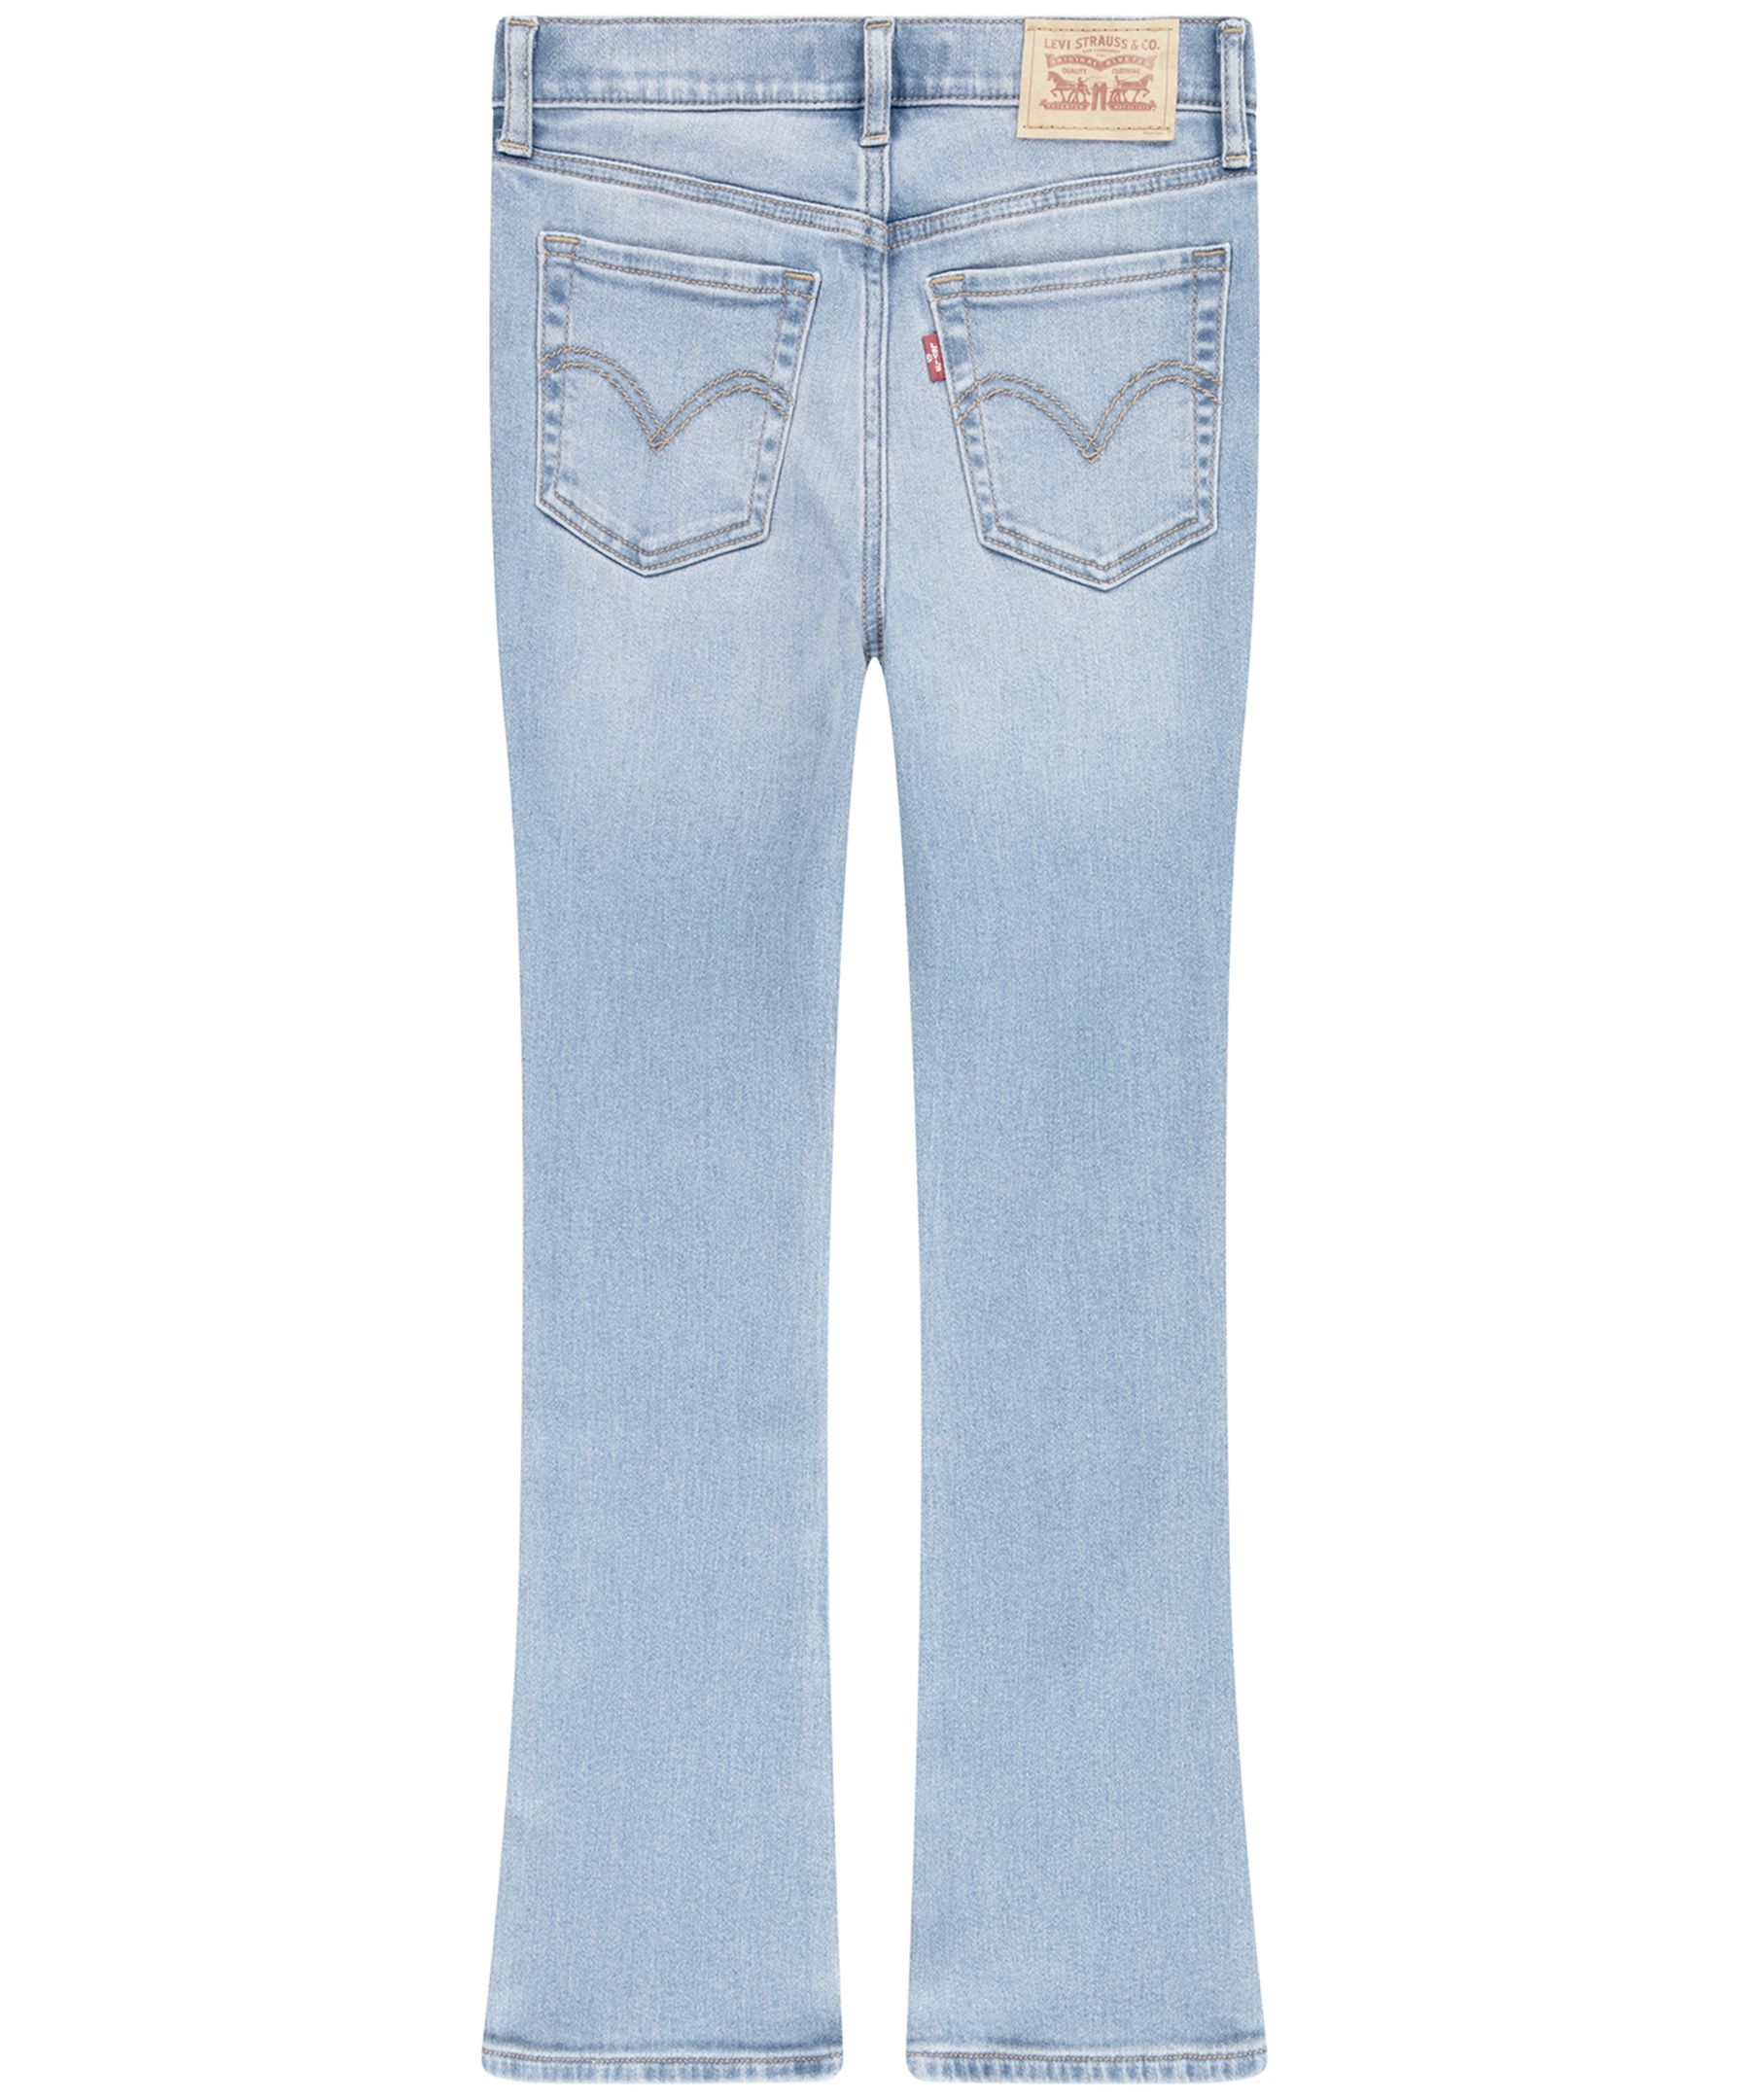 Levi's® Women's 726™ High-rise Flare Jeans - Light Of My Life 24